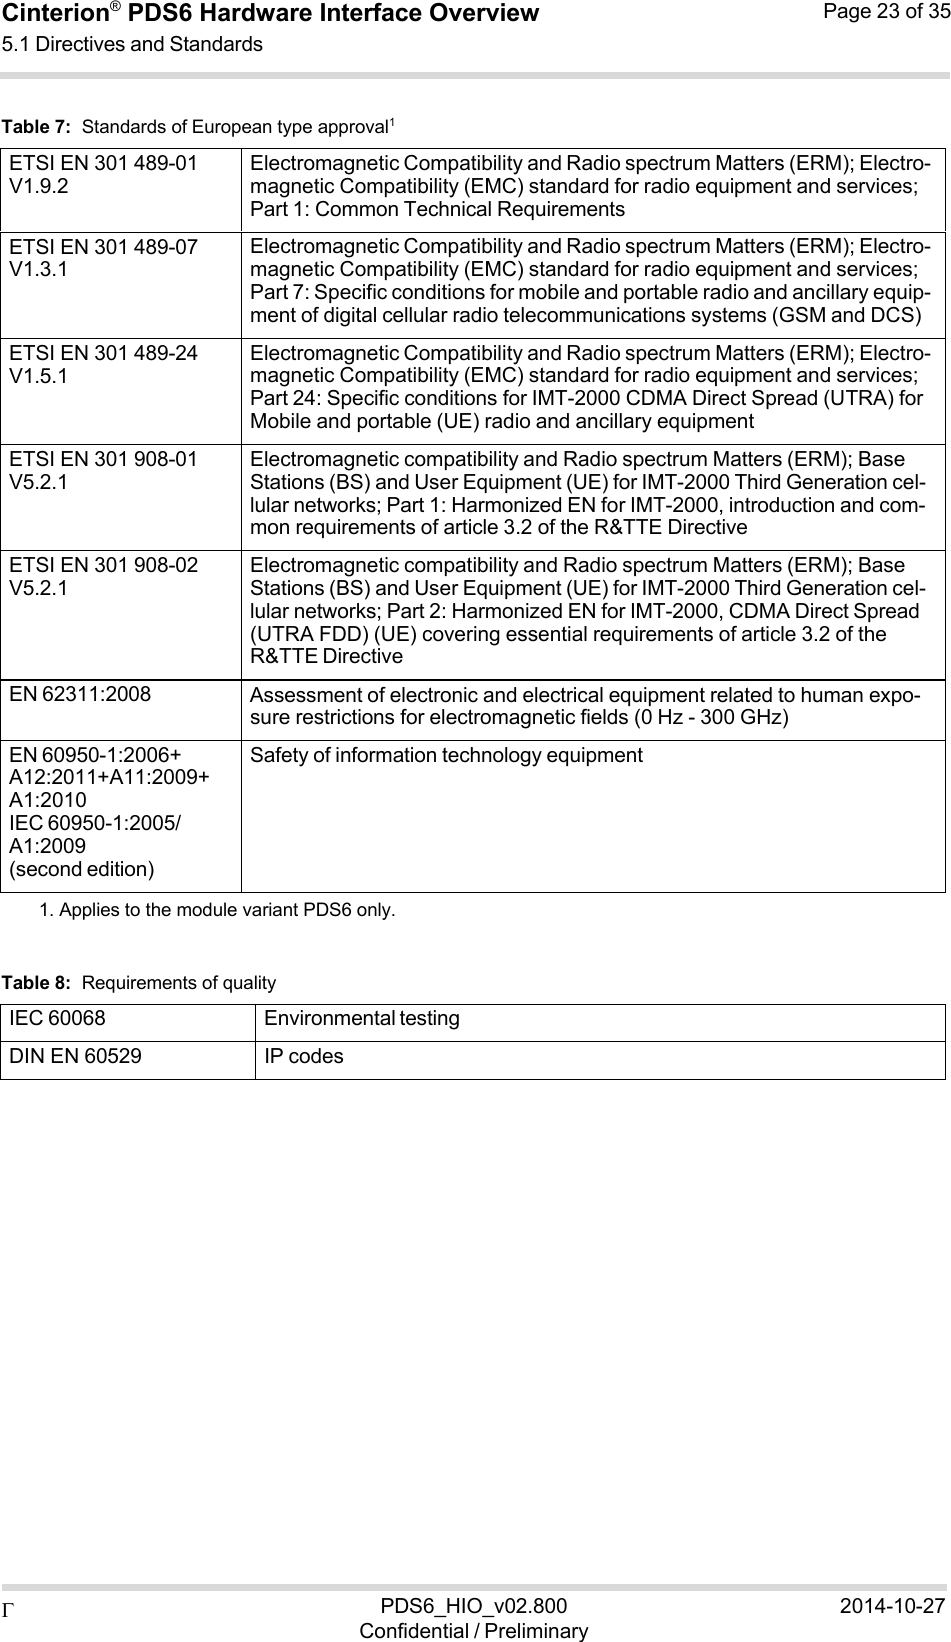  PDS6_HIO_v02.800Confidential / Preliminary2014-10-27Cinterion®  PDS6 Hardware Interface Overview 5.1 Directives and Standards Page 23 of 35   Table 7:  Standards of European type approval1  ETSI EN 301 489-01 V1.9.2 Electromagnetic Compatibility and Radio spectrum Matters (ERM); Electro- magnetic Compatibility (EMC) standard for radio equipment and services; Part 1: Common Technical Requirements ETSI EN 301 489-07 V1.3.1 Electromagnetic Compatibility and Radio spectrum Matters (ERM); Electro- magnetic Compatibility (EMC) standard for radio equipment and services; Part 7: Specific conditions for mobile and portable radio and ancillary equip- ment of digital cellular radio telecommunications systems (GSM and DCS) ETSI EN 301 489-24 V1.5.1 Electromagnetic Compatibility and Radio spectrum Matters (ERM); Electro- magnetic Compatibility (EMC) standard for radio equipment and services; Part 24: Specific conditions for IMT-2000 CDMA Direct Spread (UTRA) for Mobile and portable (UE) radio and ancillary equipment ETSI EN 301 908-01 V5.2.1 Electromagnetic compatibility and Radio spectrum Matters (ERM); Base Stations (BS) and User Equipment (UE) for IMT-2000 Third Generation cel- lular networks; Part 1: Harmonized EN for IMT-2000, introduction and com- mon requirements of article 3.2 of the R&amp;TTE Directive ETSI EN 301 908-02 V5.2.1 Electromagnetic compatibility and Radio spectrum Matters (ERM); Base Stations (BS) and User Equipment (UE) for IMT-2000 Third Generation cel- lular networks; Part 2: Harmonized EN for IMT-2000, CDMA Direct Spread (UTRA FDD) (UE) covering essential requirements of article 3.2 of the R&amp;TTE Directive EN 62311:2008 Assessment of electronic and electrical equipment related to human expo- sure restrictions for electromagnetic fields (0 Hz - 300 GHz) EN 60950-1:2006+ A12:2011+A11:2009+ A1:2010 IEC 60950-1:2005/ A1:2009 (second edition) Safety of information technology equipment1. Applies to the module variant PDS6 only.   Table 8:  Requirements of quality  IEC 60068 Environmental testingDIN EN 60529 IP codes 